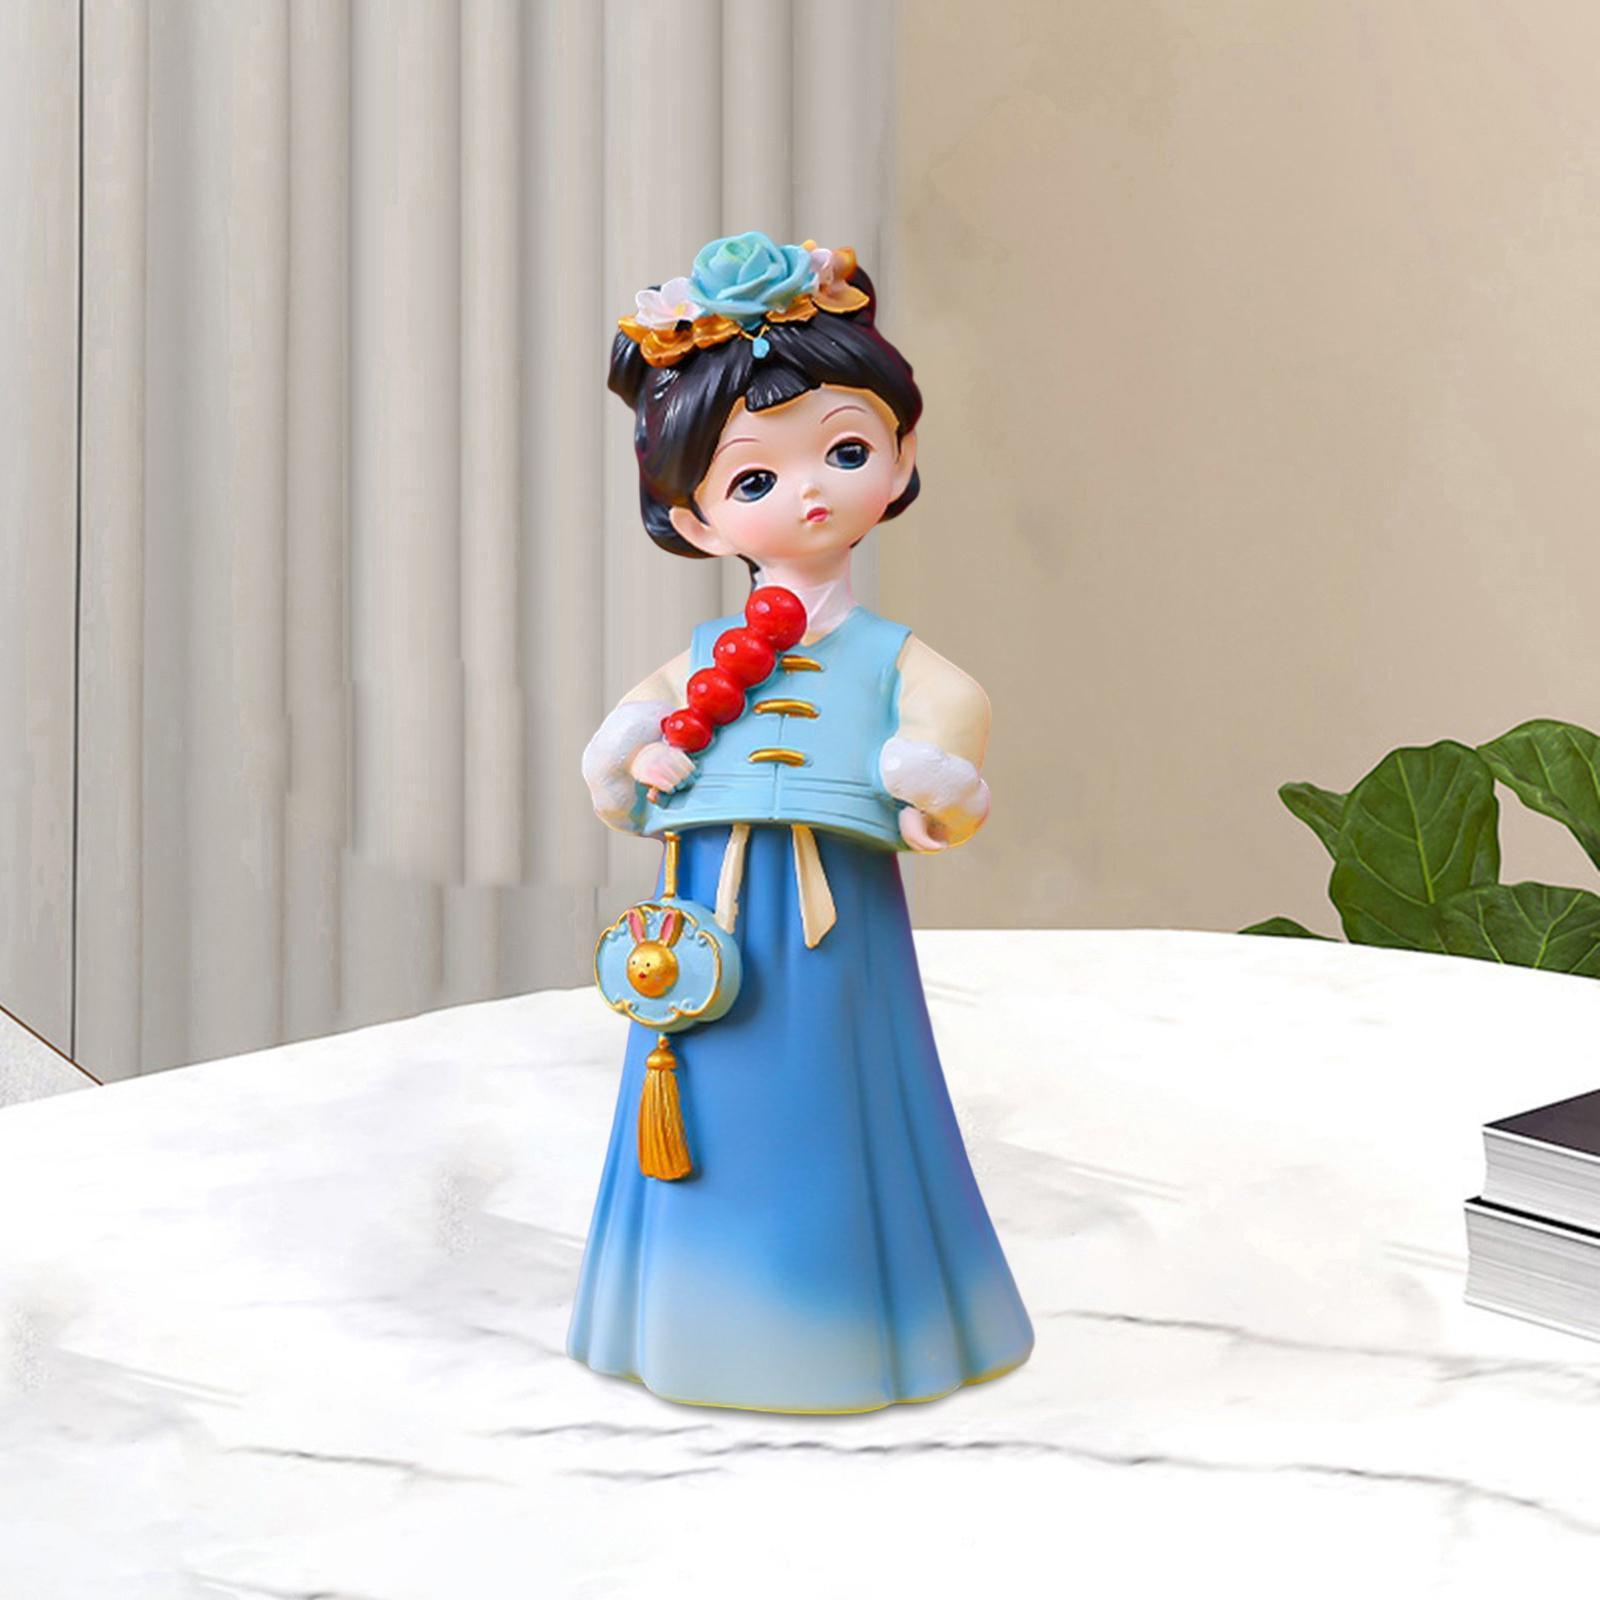 Traditional Chinese Girls Statue Sculpture Entryway Window Resin Figurines